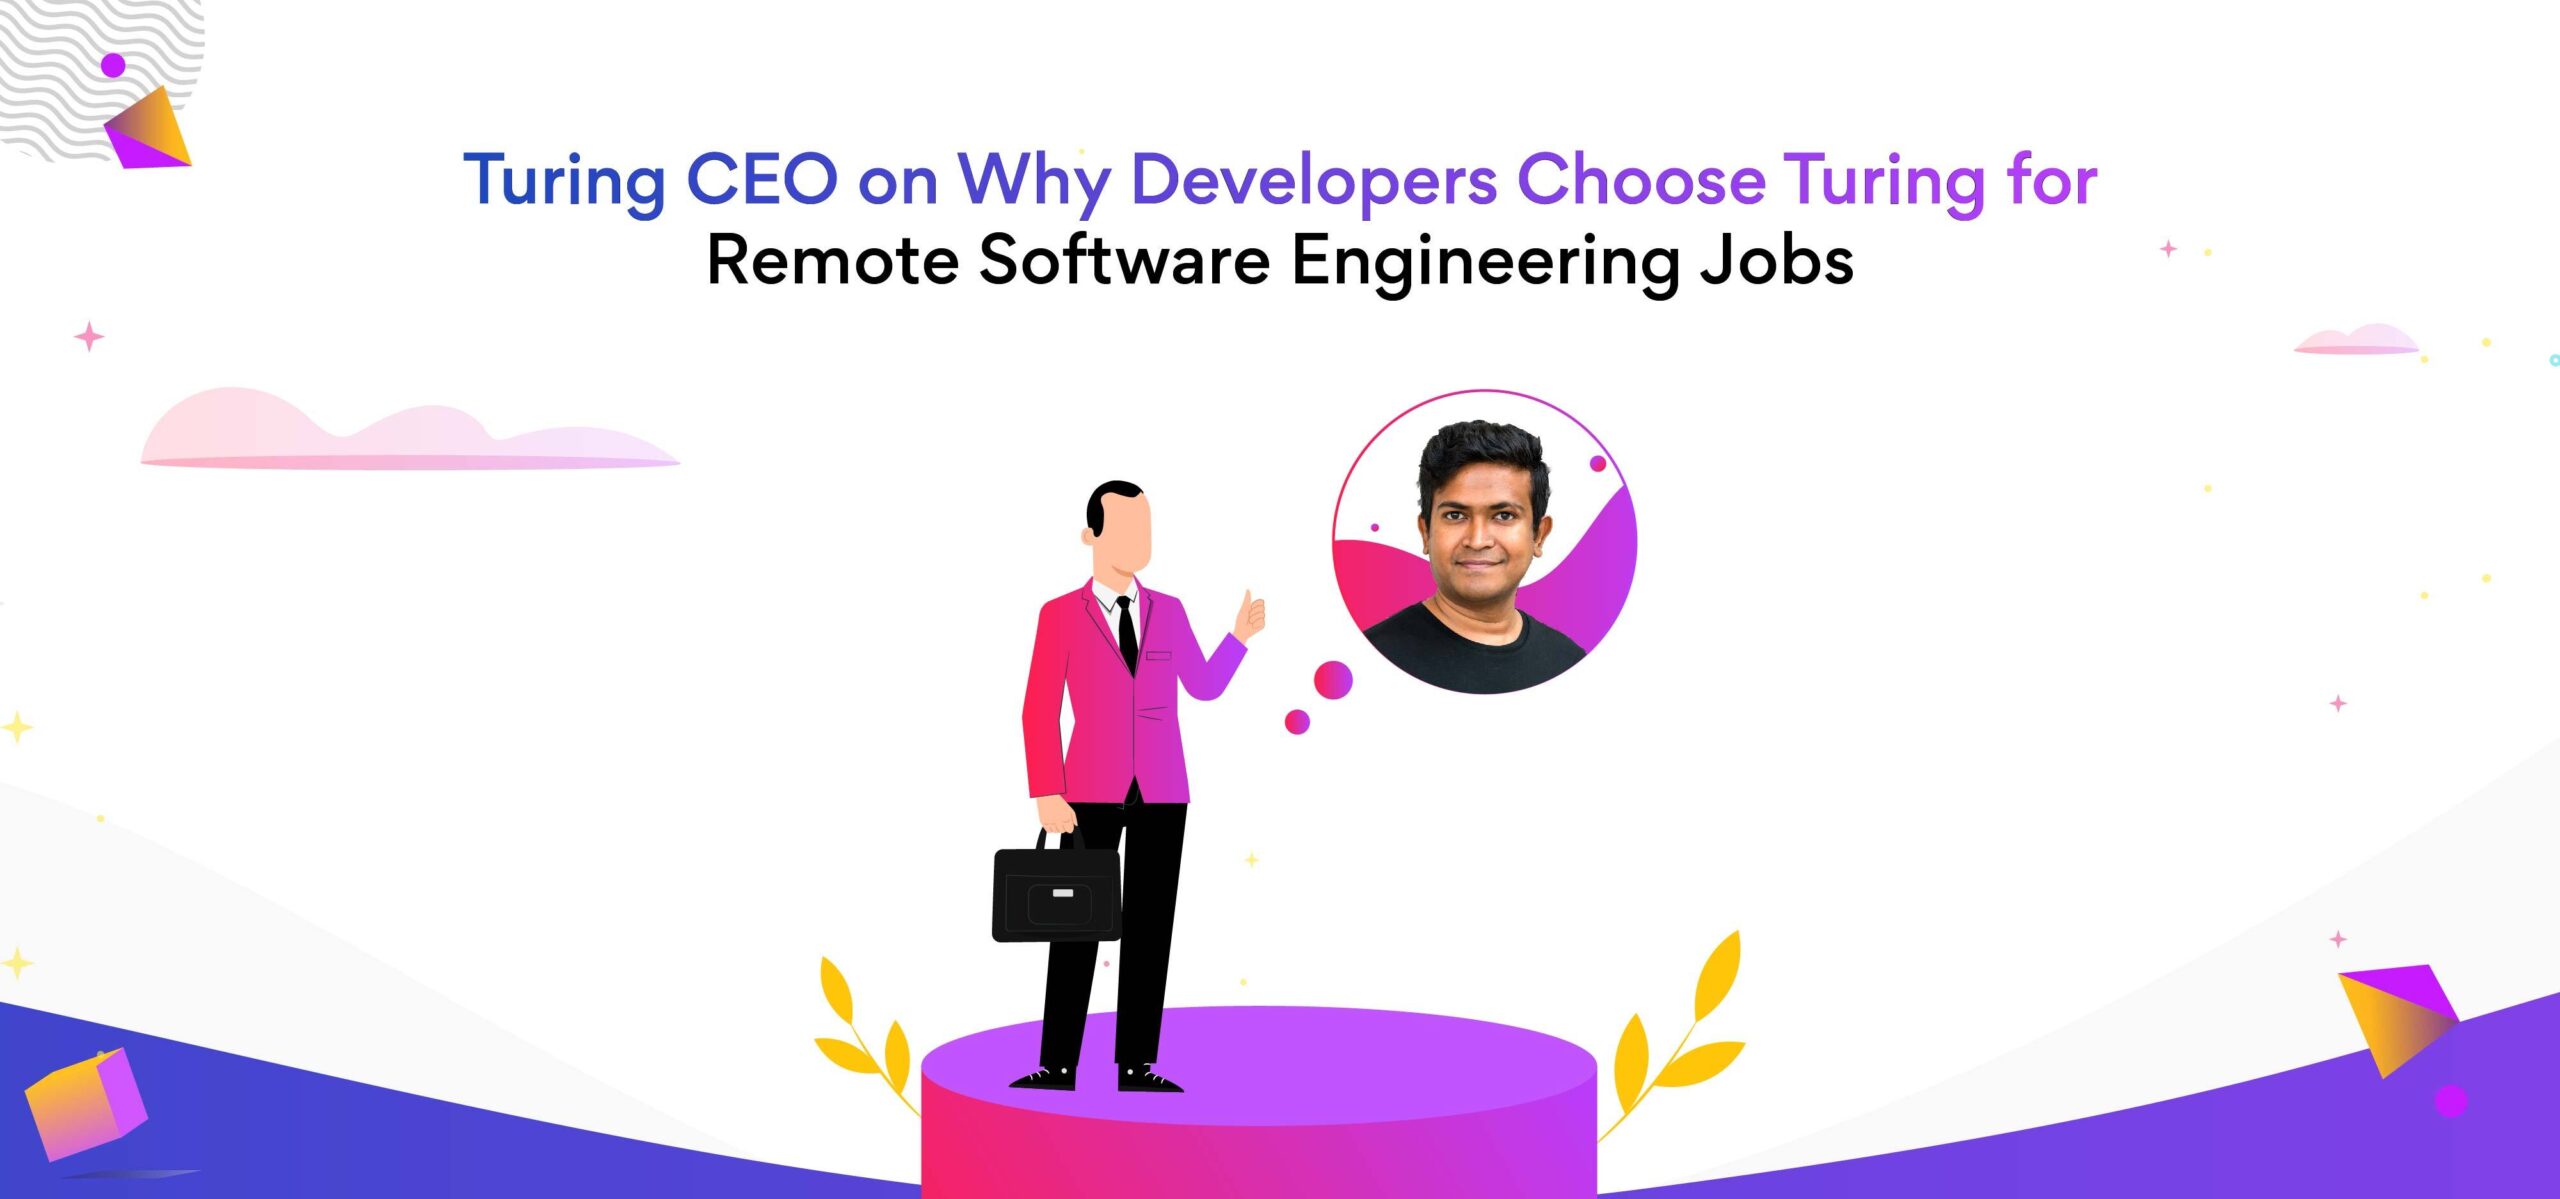 Why Choose Turing for Remote Software Engineering Jobs?